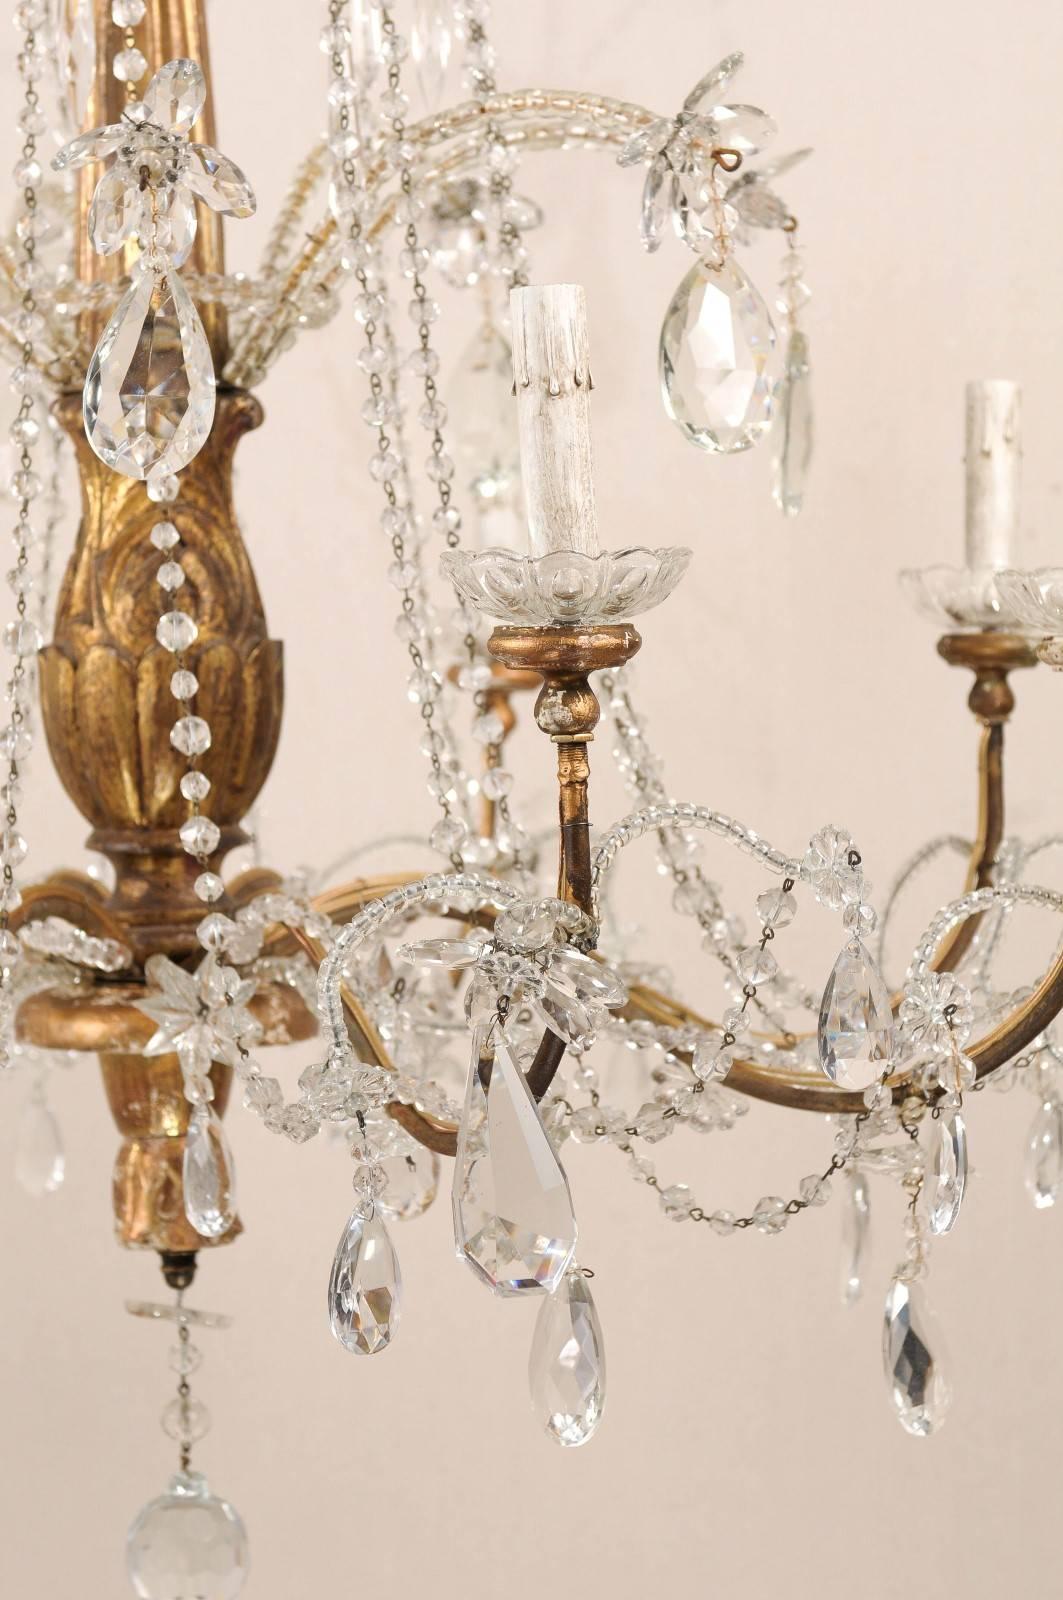 Italian Crystal and Giltwood Chandelier from the 19th Century - Gold Color 1